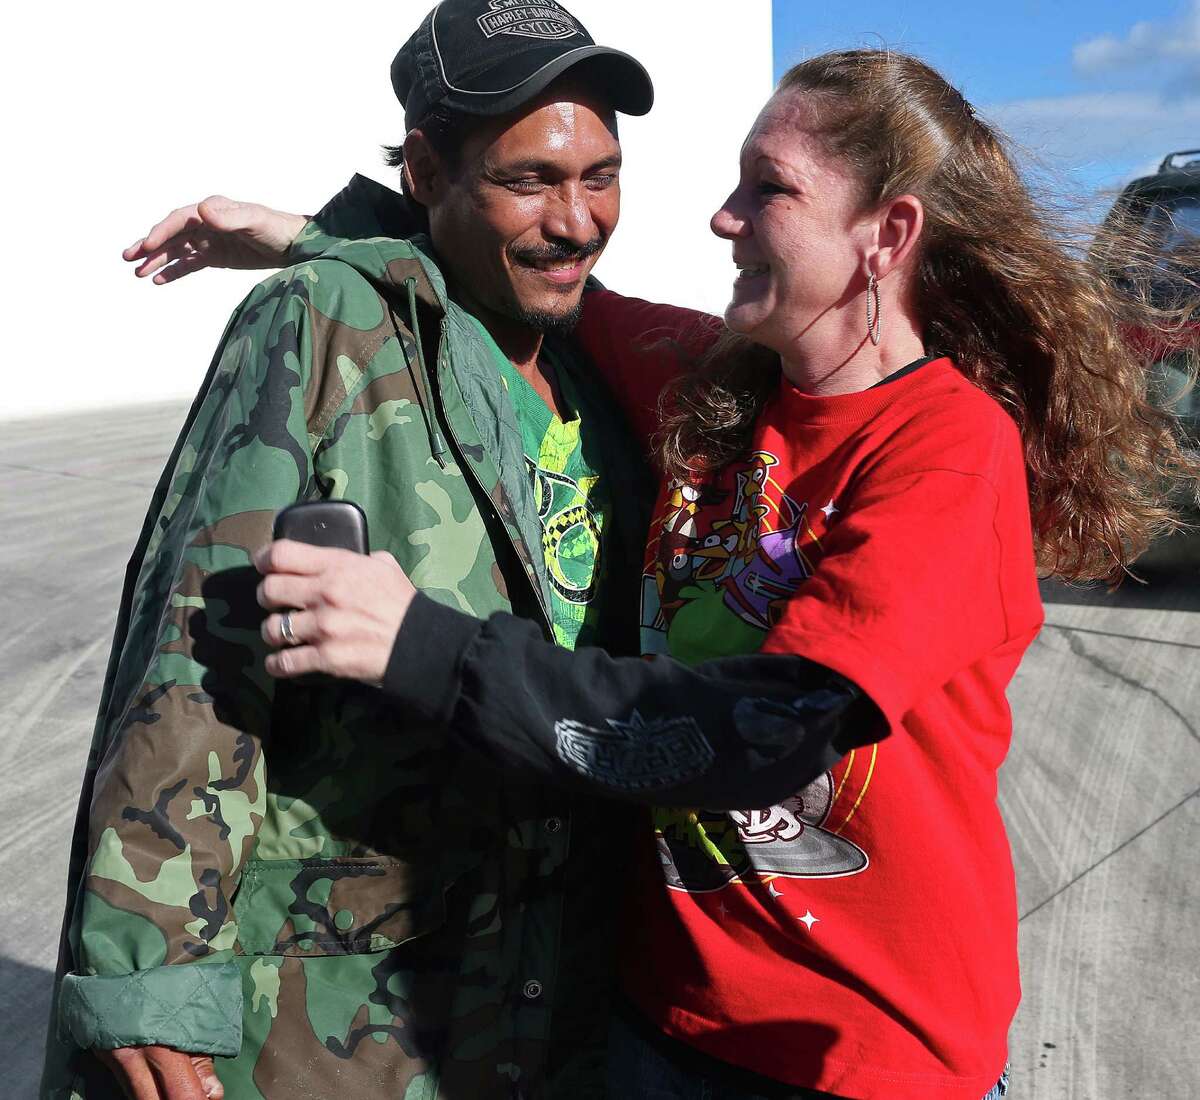 Roel Martinez, 41, gets a hug from his girlfriend, Angela Crandall, 41, after he survived falling into a drainage culvert full of storm water on Saturday, Oct. 25, 2015. Martinez showed up at a press conference held by the San Antonio Fire Department Chief Charles Hood on Sunday, Oct 25, 2015. Martinez went missing after he attempted to keep his dog, "Chico," from falling into the storm drainage near the intersection of Babcock Road and Fredericksburg in the early hours on Saturday. He was carried by the water through a tunnel and surfaced down stream. His dog also survived.